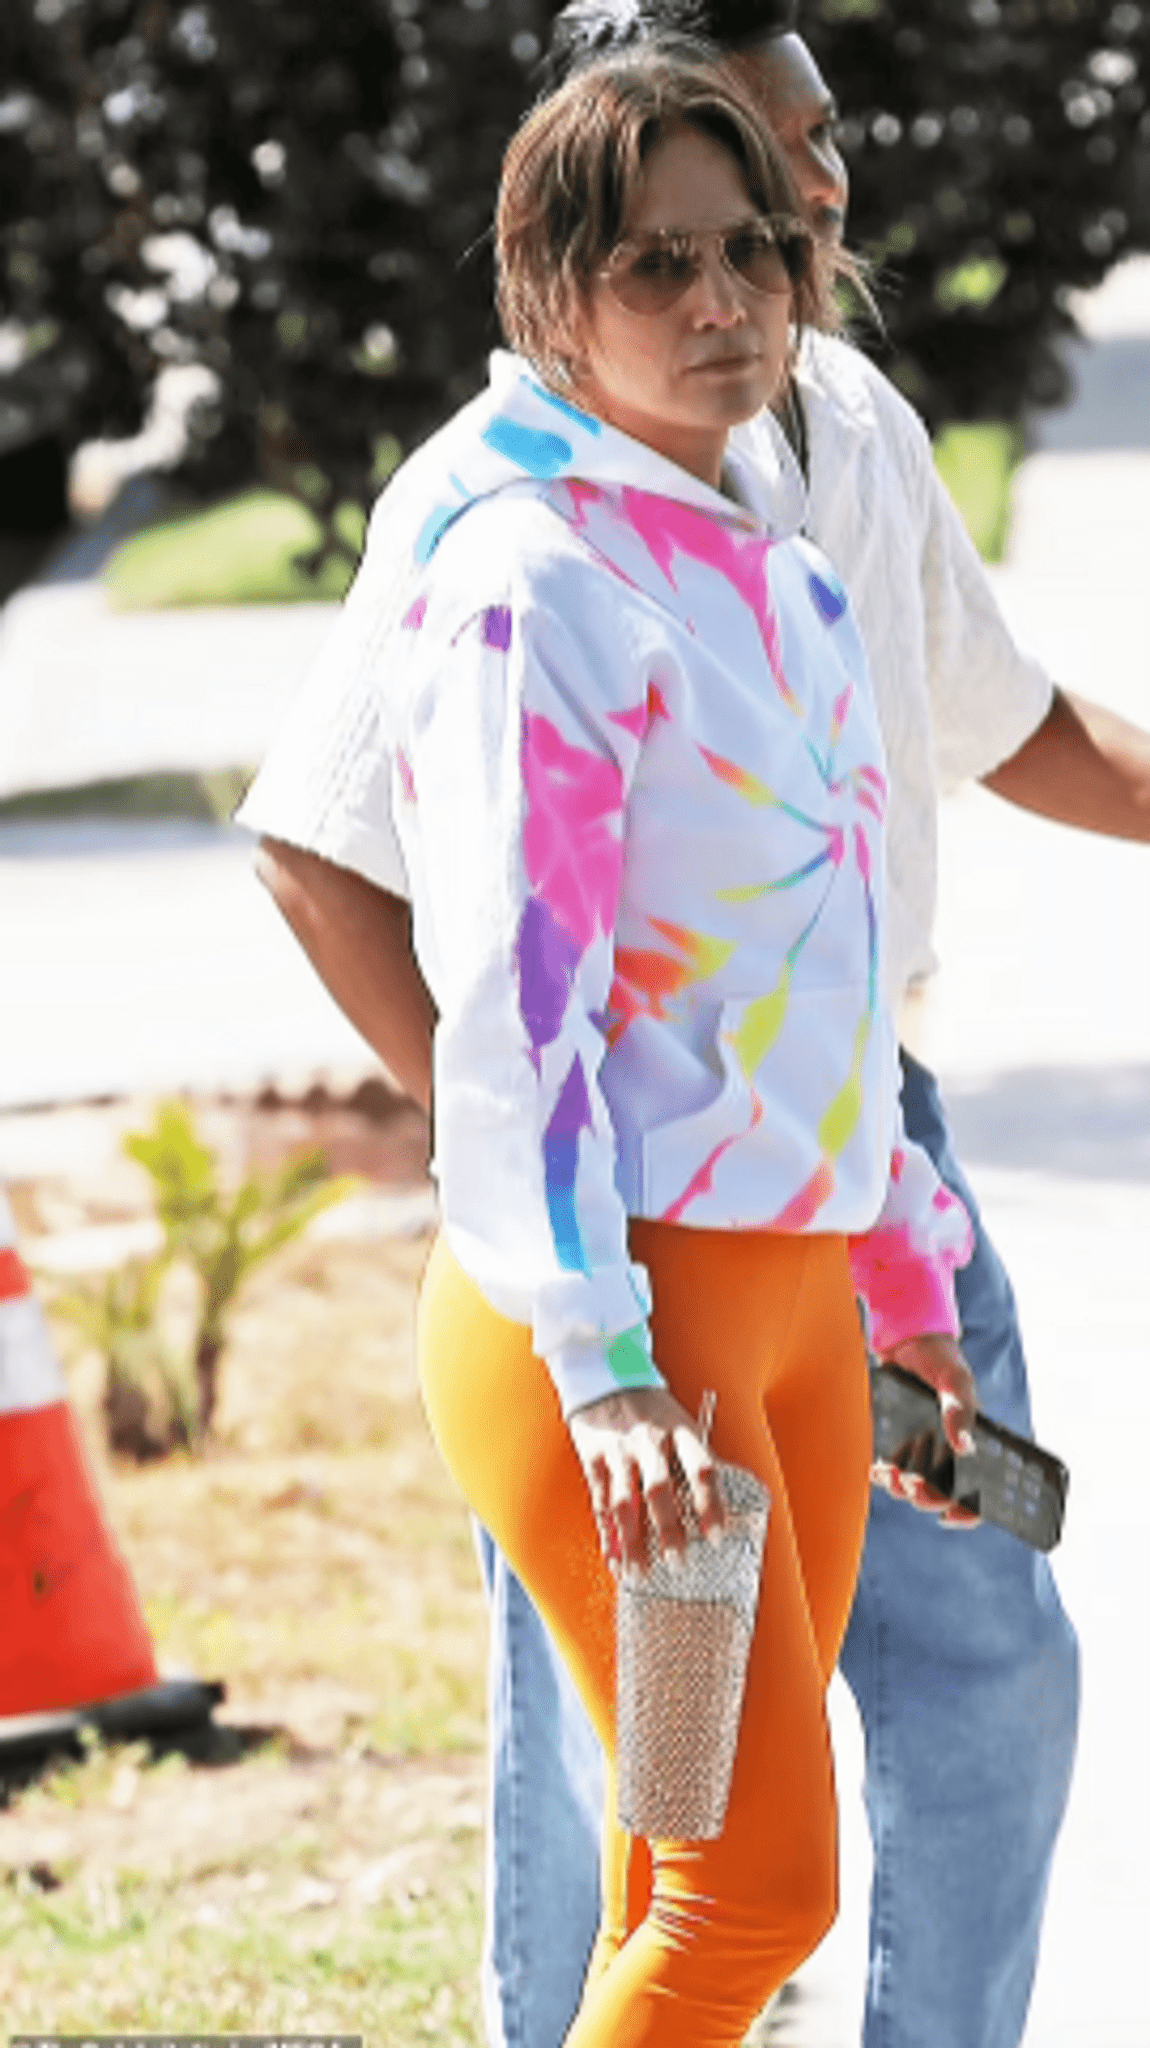 Jennifer Lopez wears orange leggings to show her love for cheerful colors